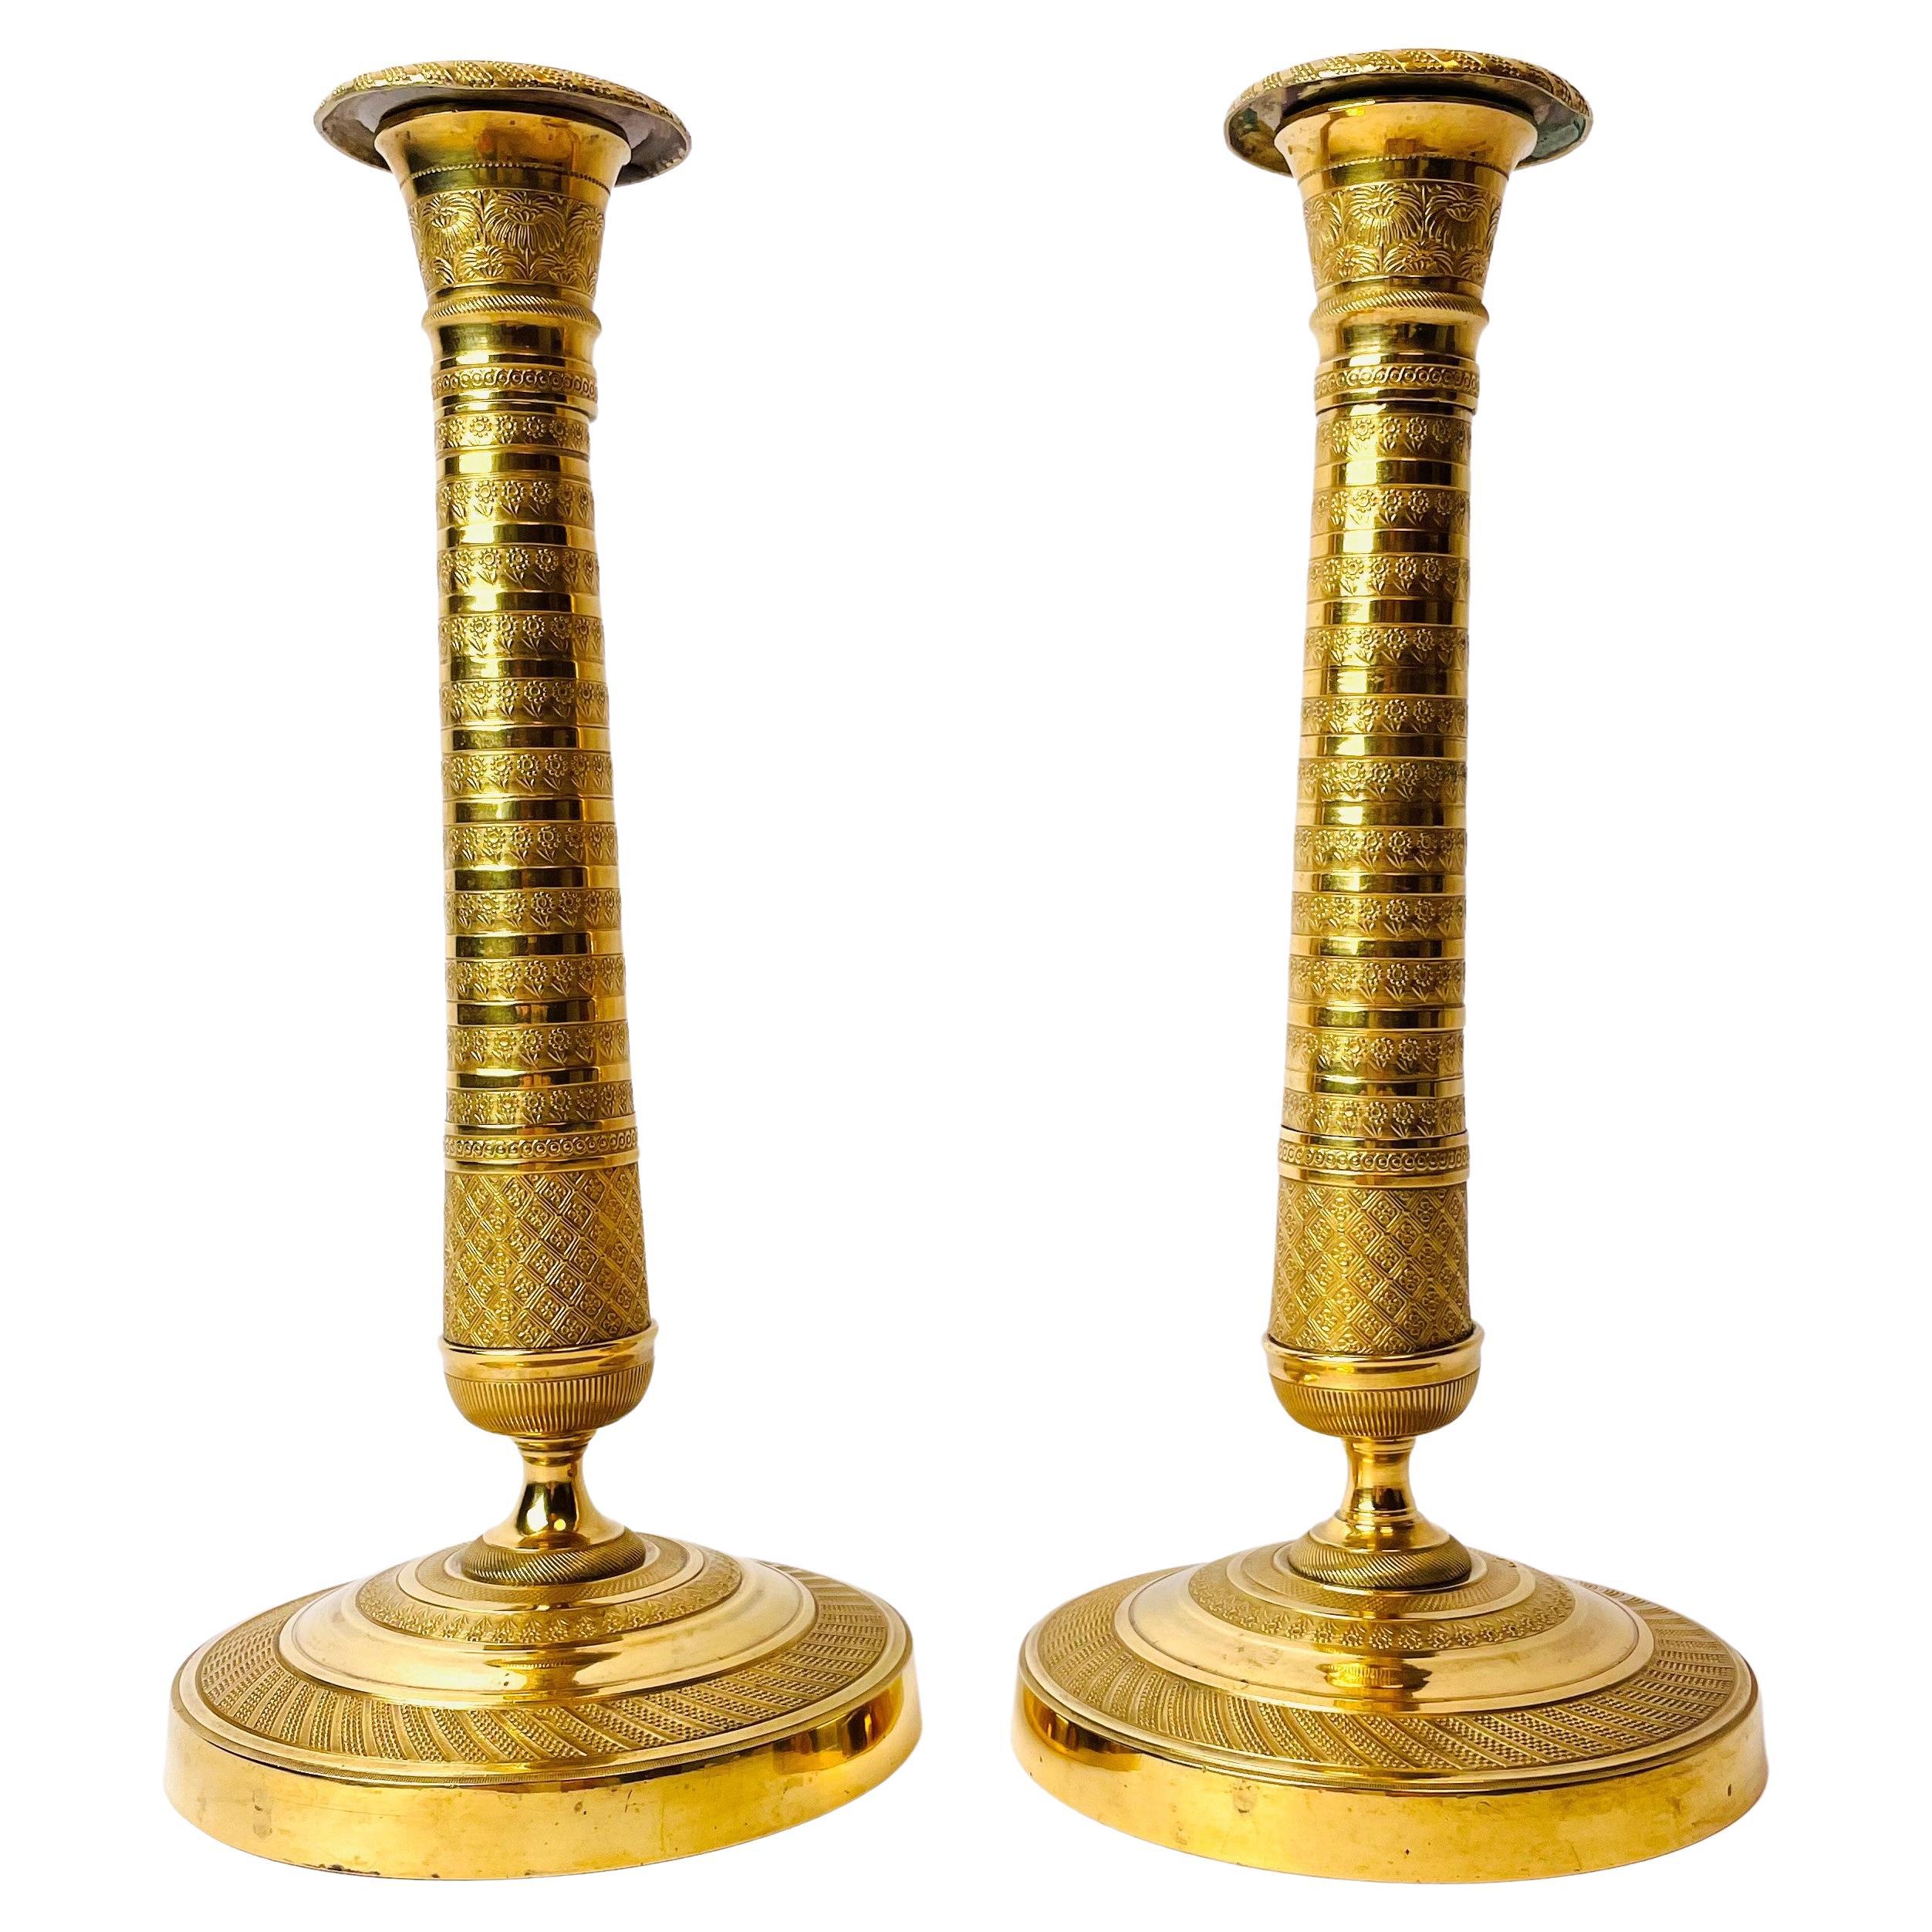 Pair of Early 19th Century Candlesticks in Gilt Bronze, French Empire